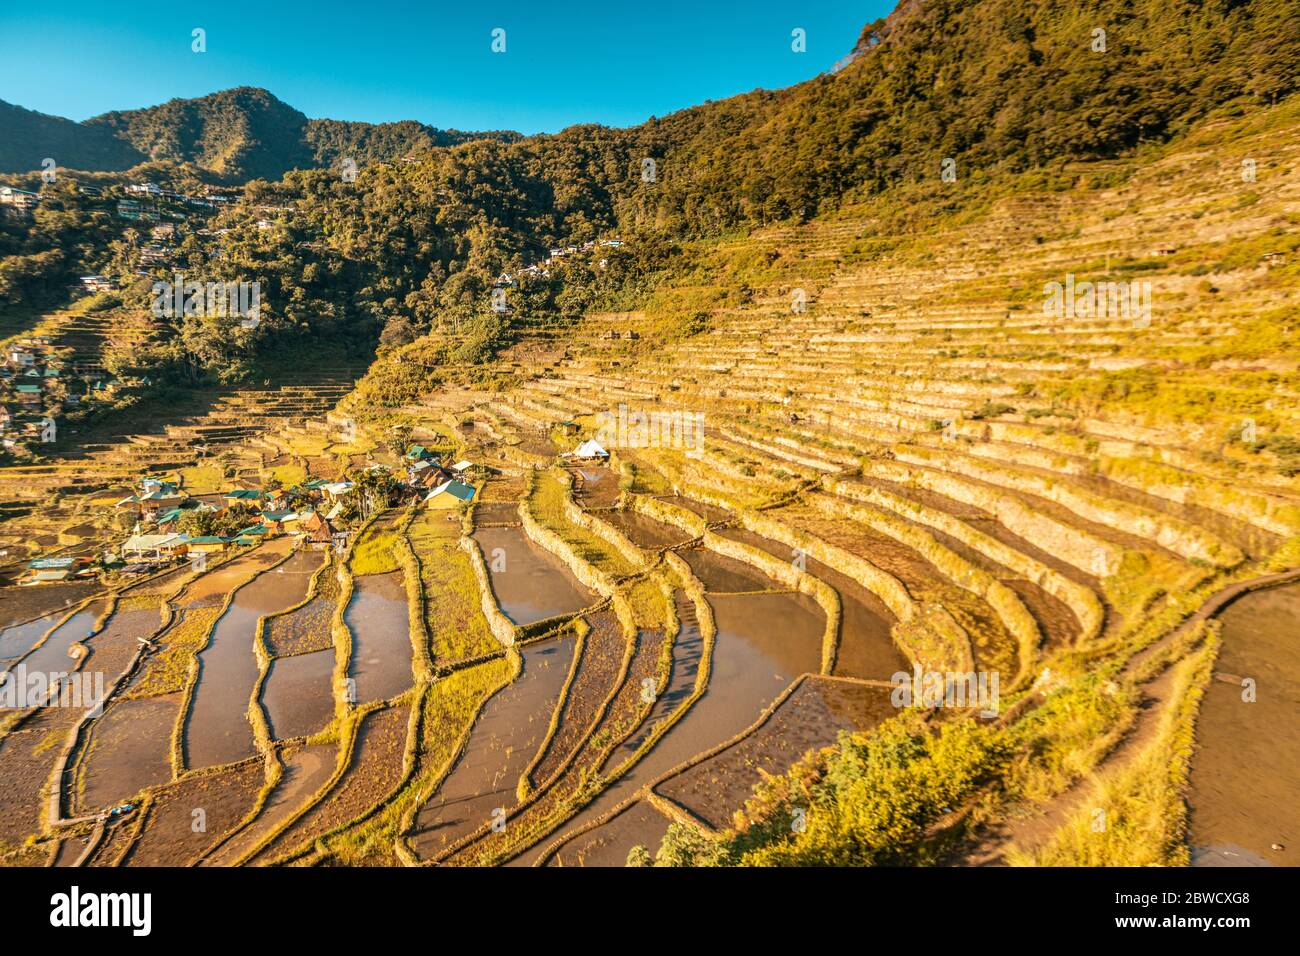 The Batad Rice Terraces in the Philippines Stock Photo